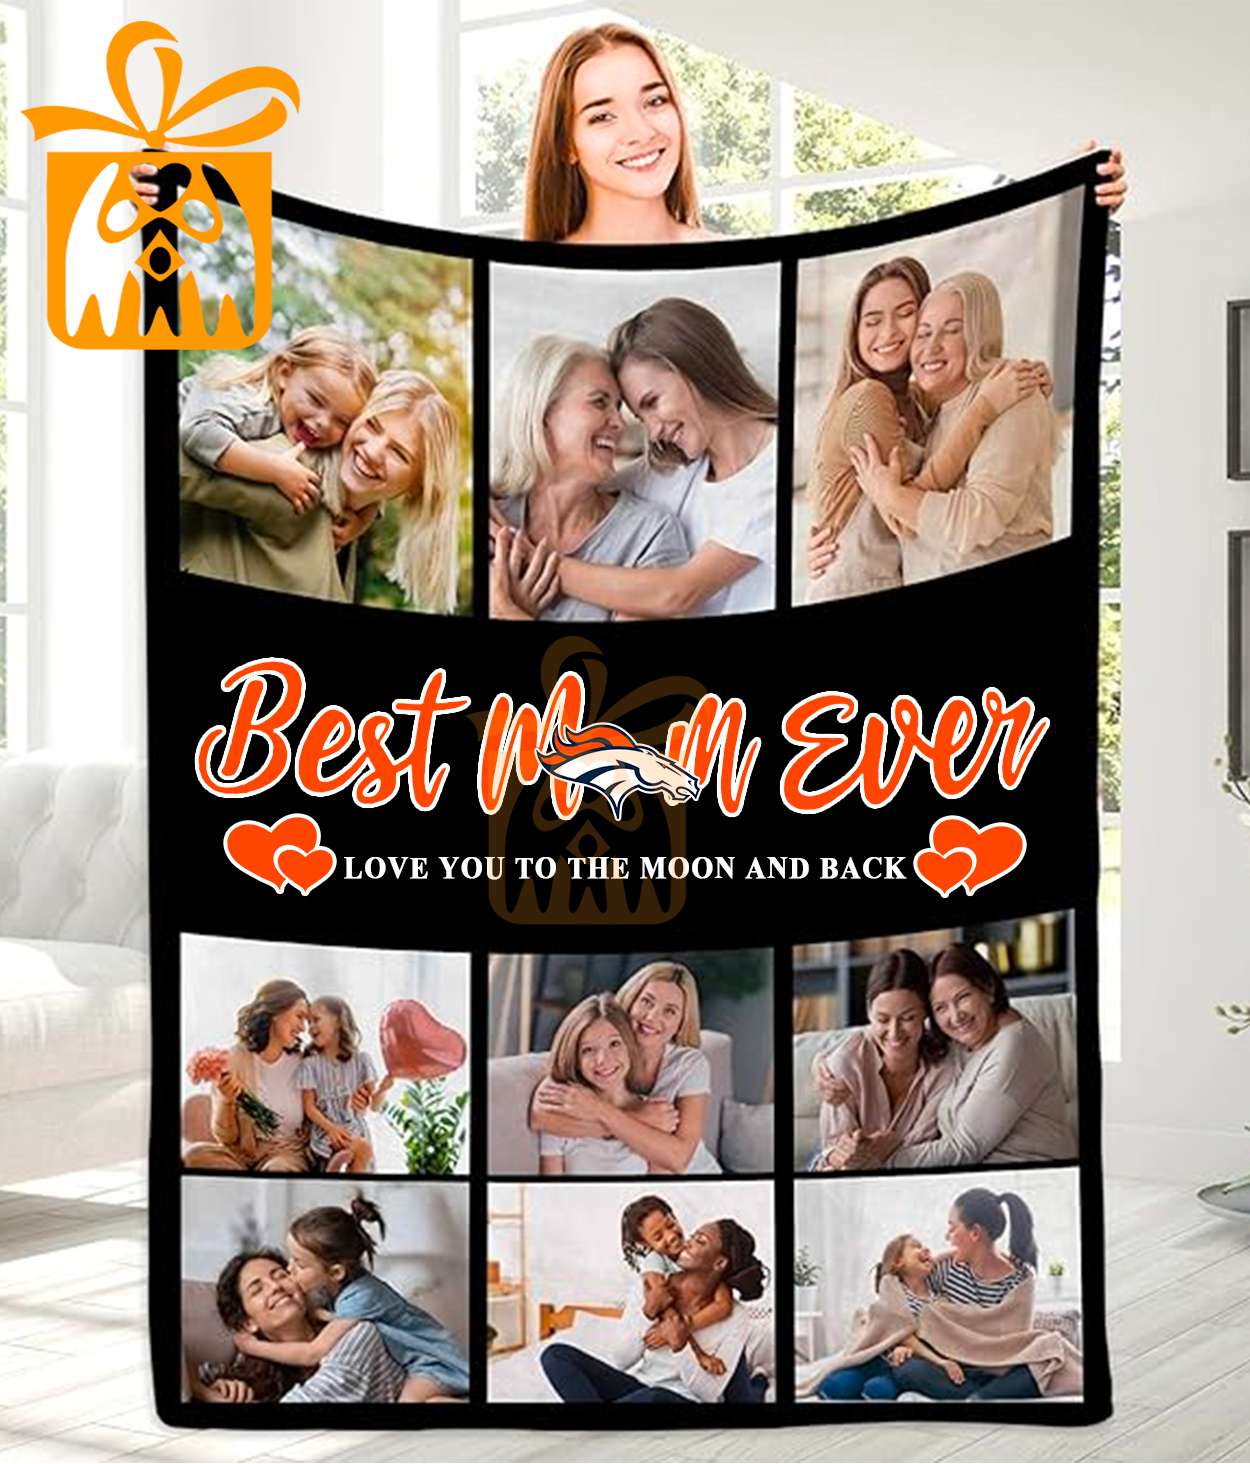 Best Mom Ever Custom NFL Denver Broncos Blankets with Pictures - Perfect Mother’s Day Gift